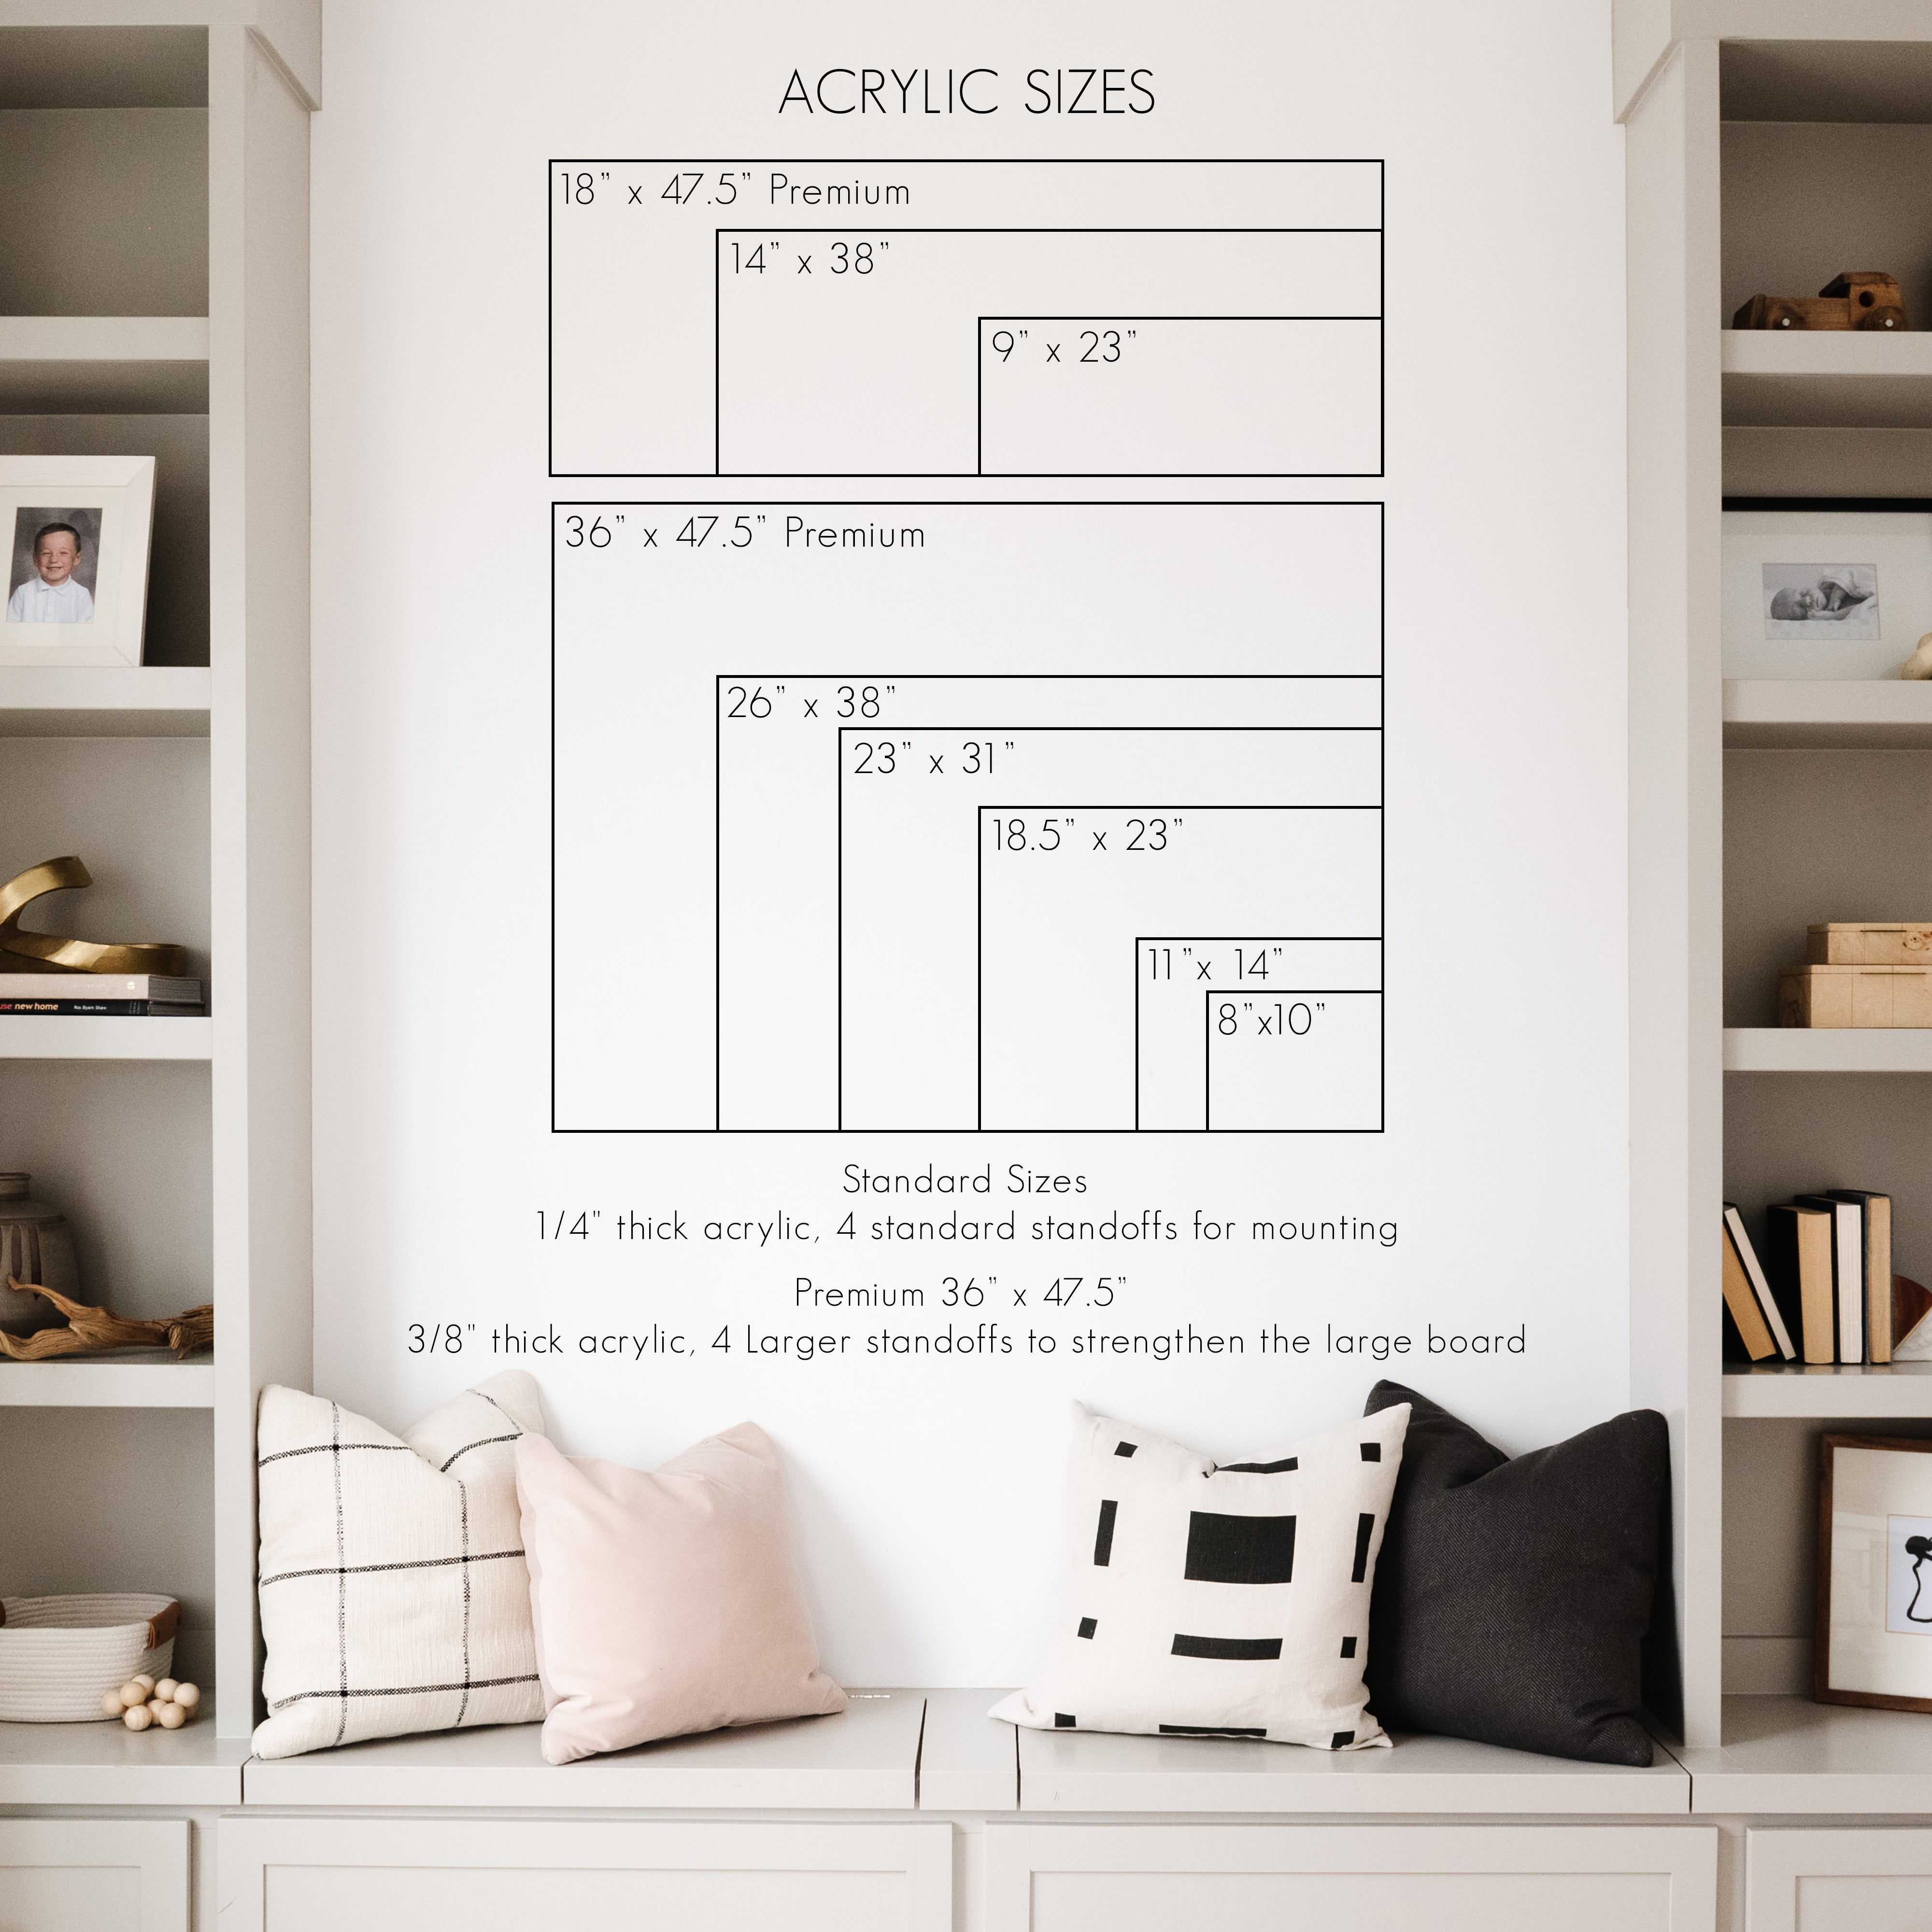 Monthly Frosted Acrylic Calendar + 6 Sections | Horizontal Pennington